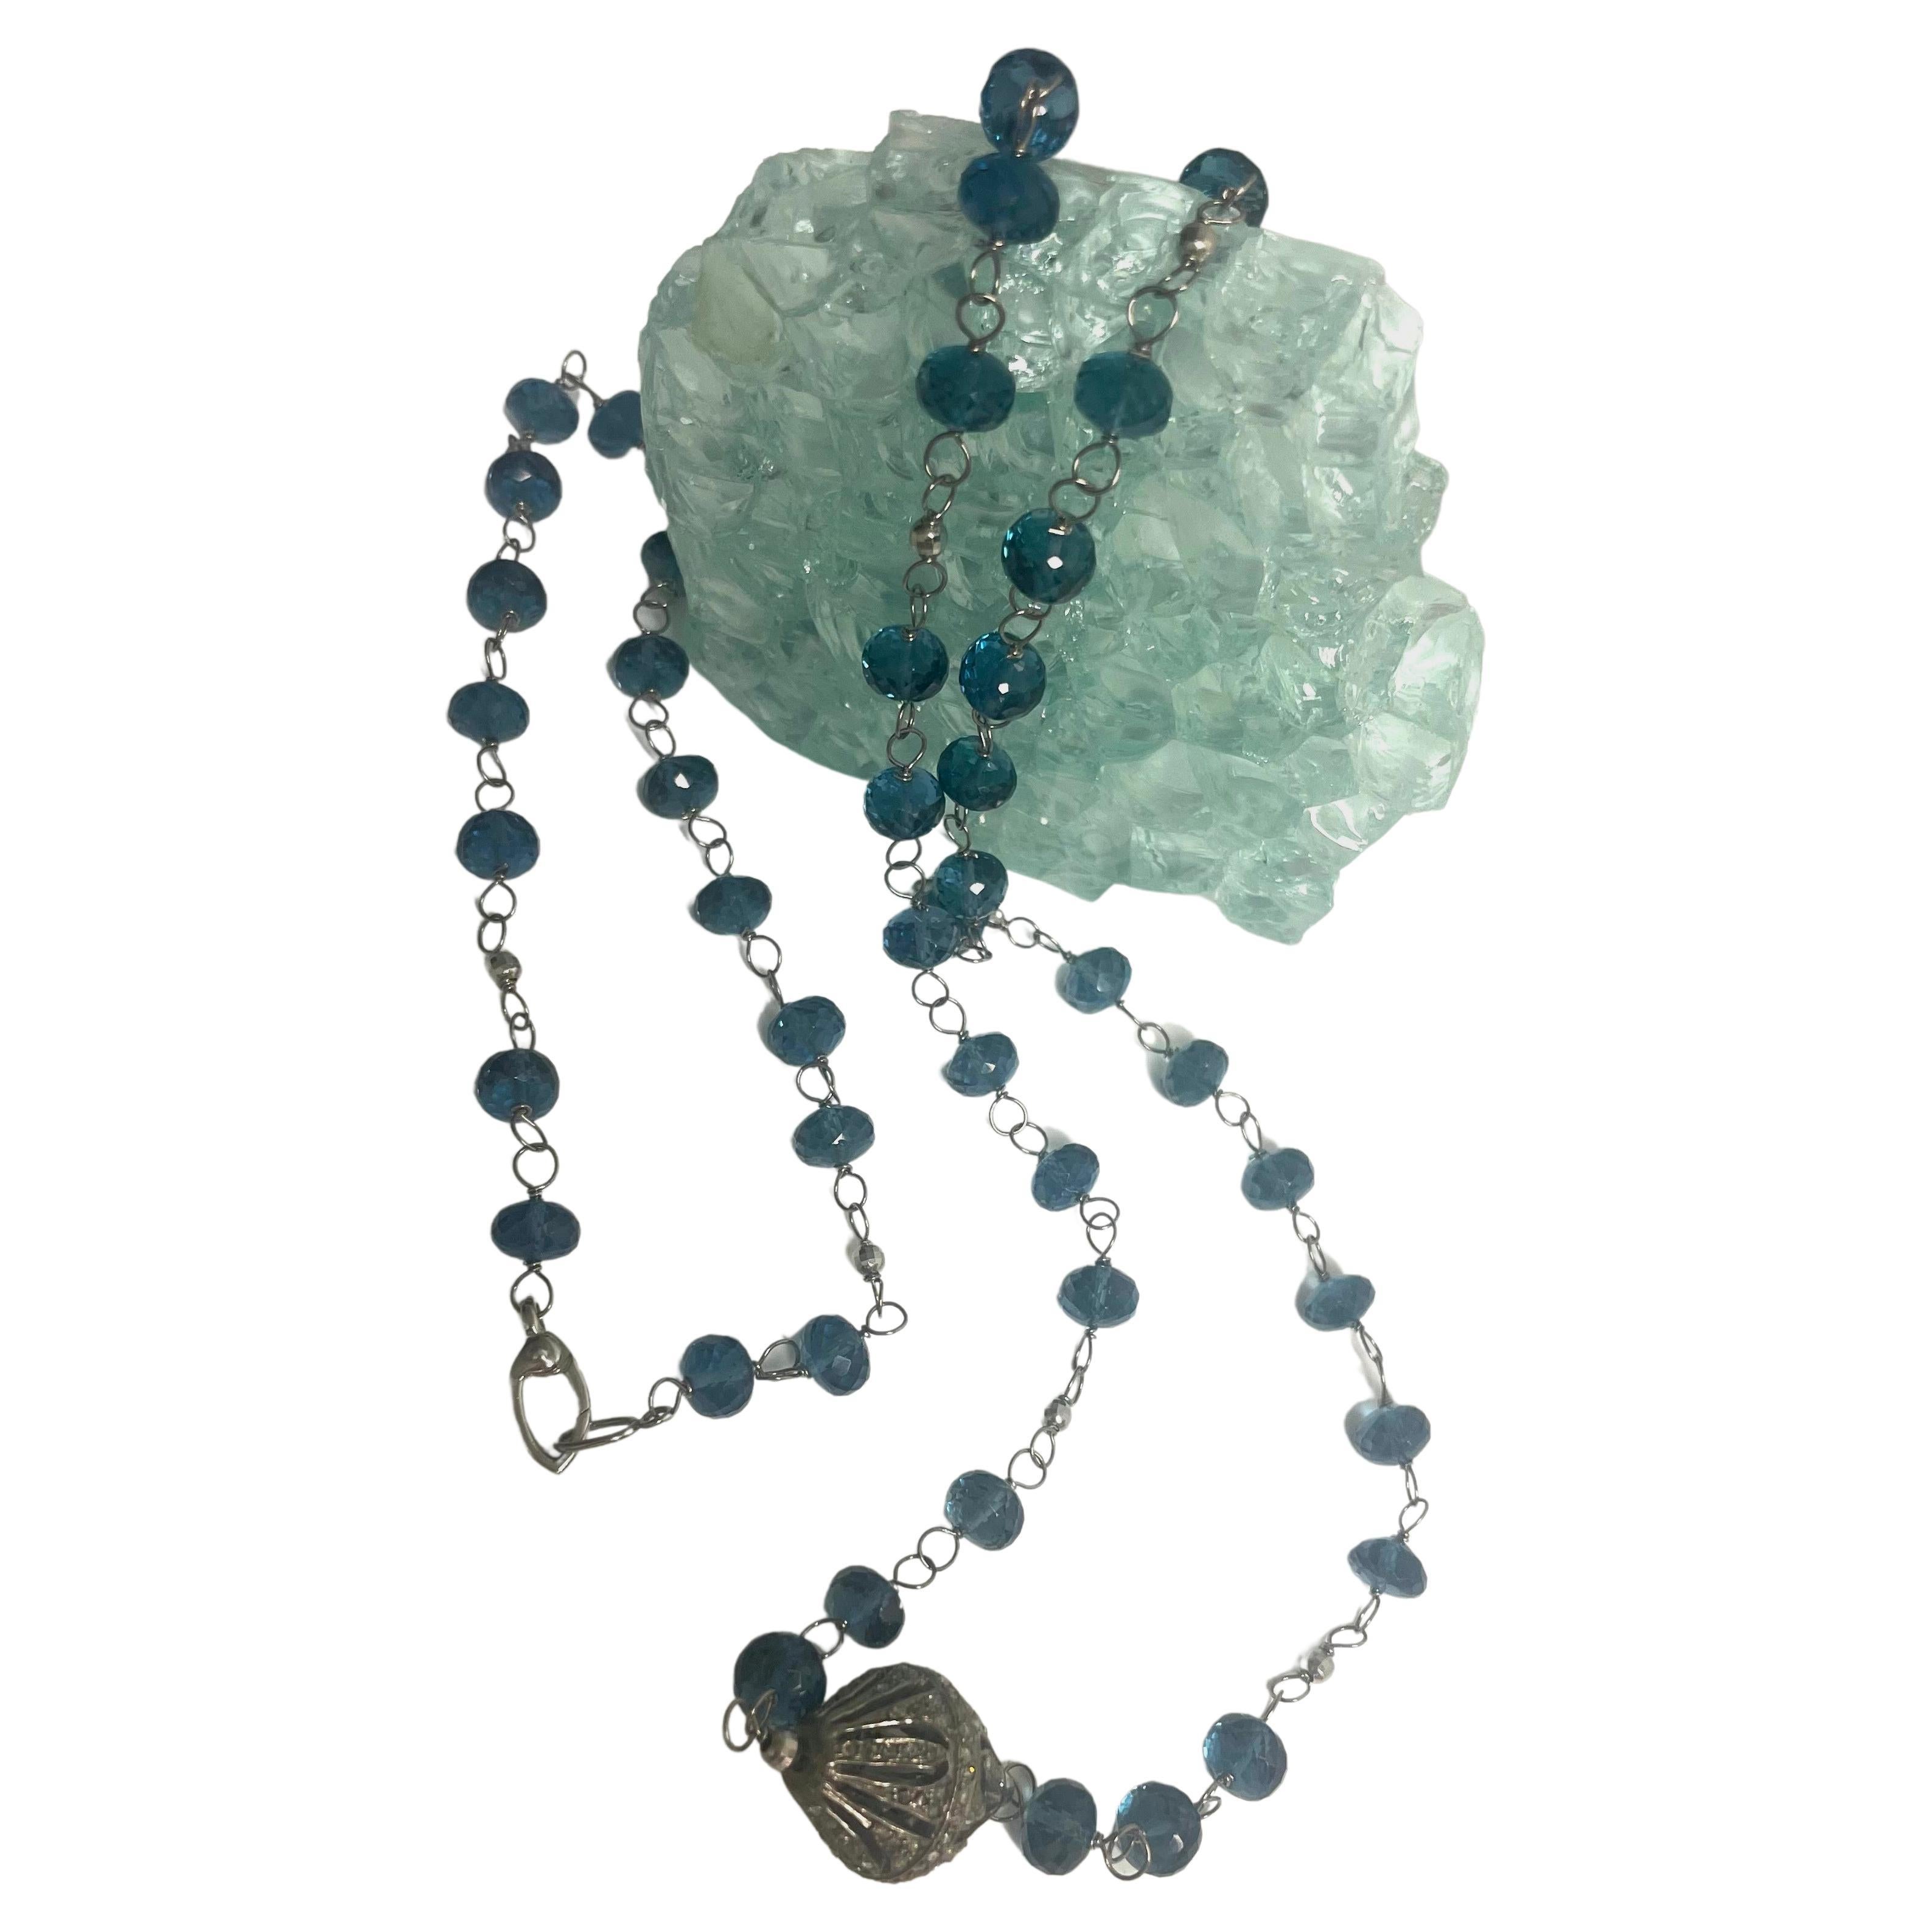 Description
The rich and exquisite London Blue color of this necklace doesn’t go unnoticed and makes a bold statement with its unusual pave diamond centerpiece. The individually wire wrapped stones and the small white gold bead accents create a